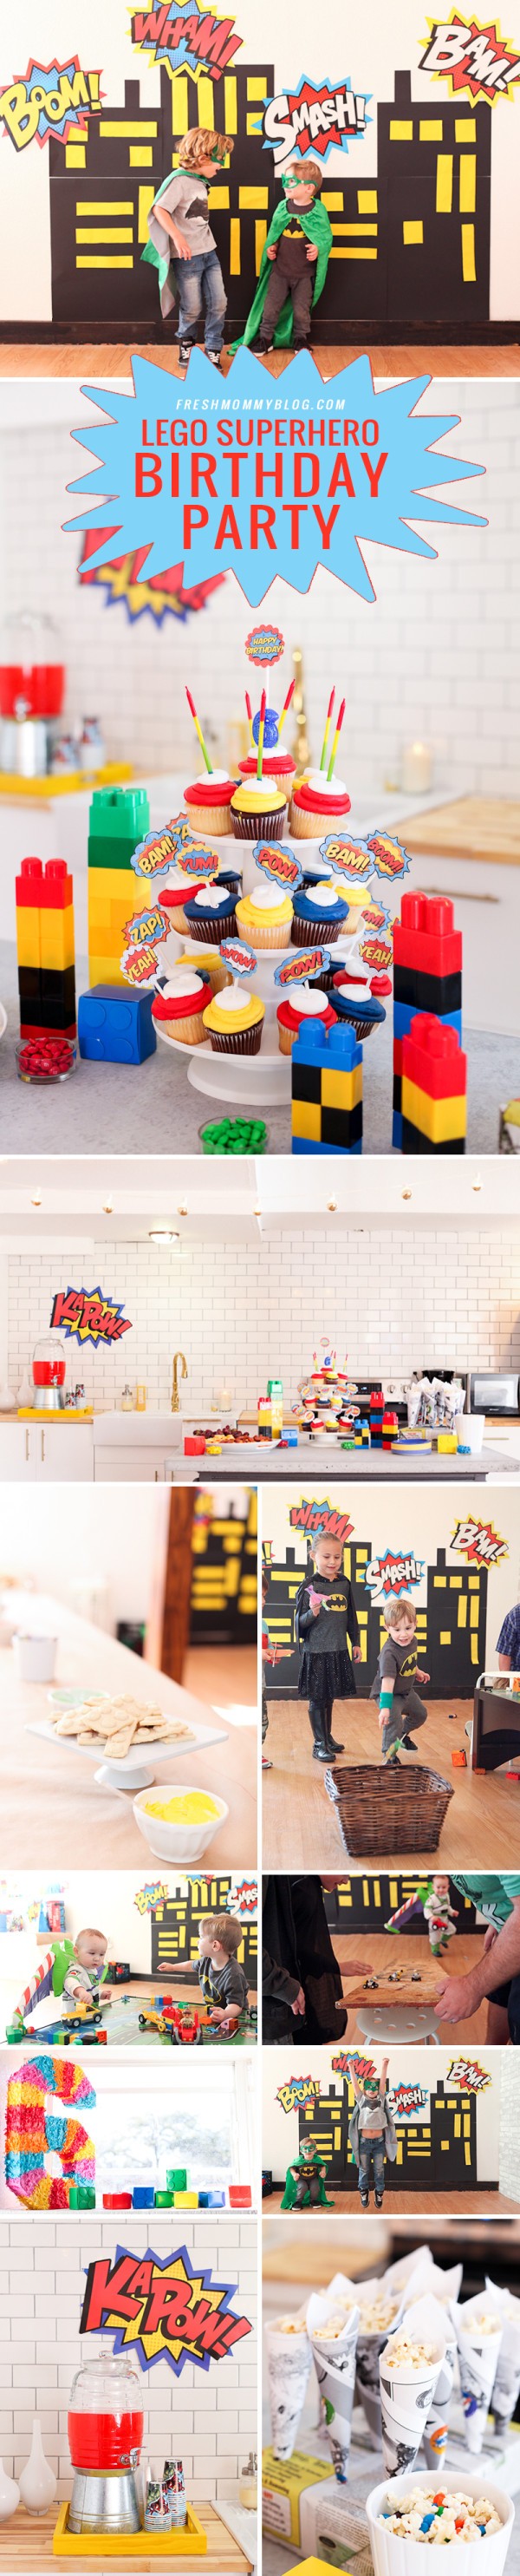 A bright and colorful Lego Superhero Birthday Party, with video games too!